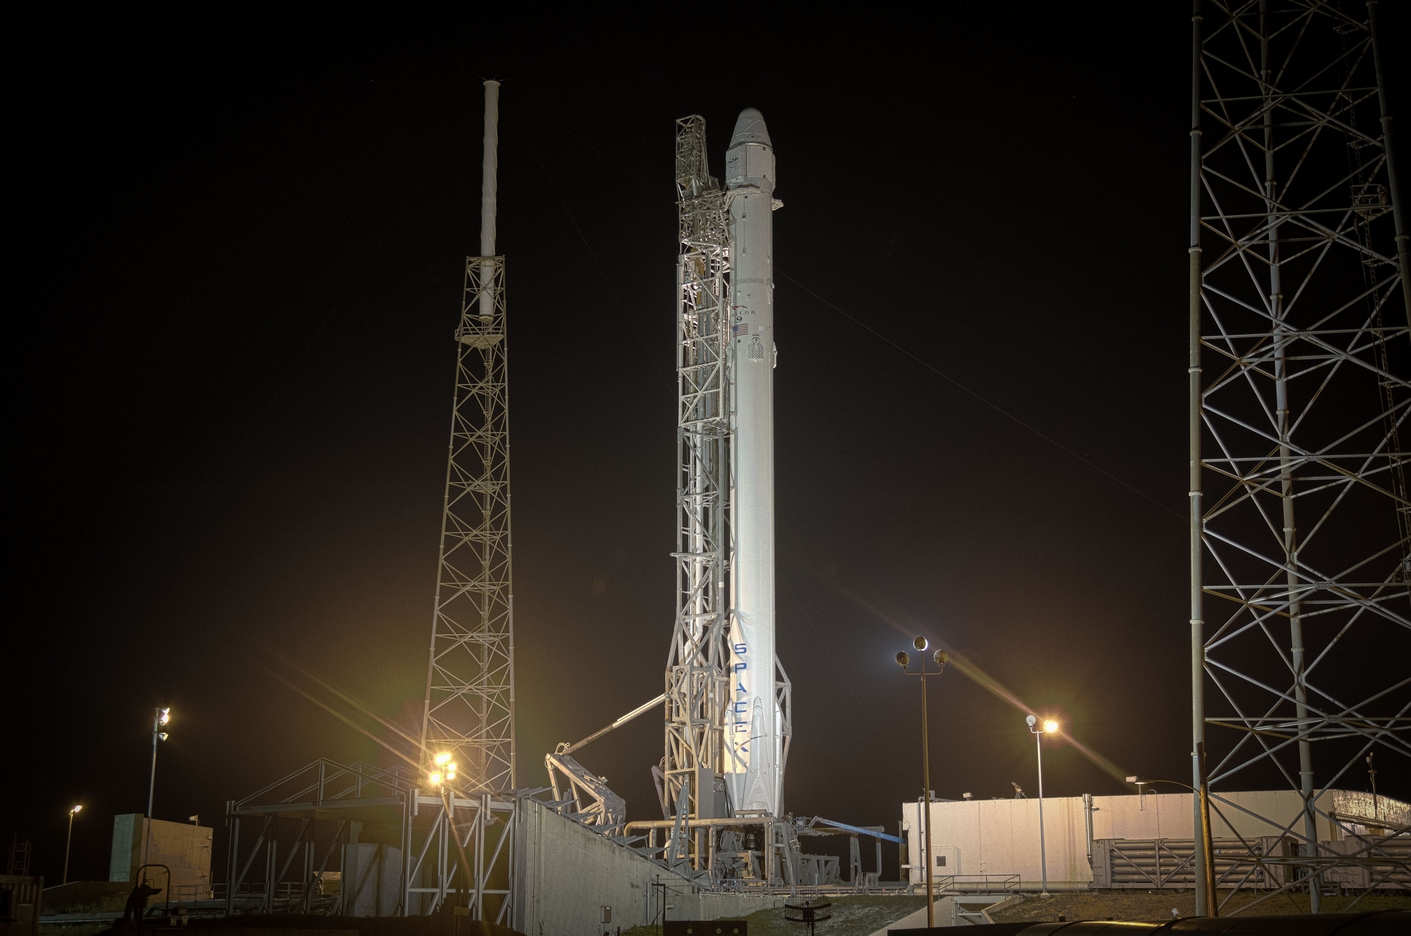 SpaceX Launch Scrubbed